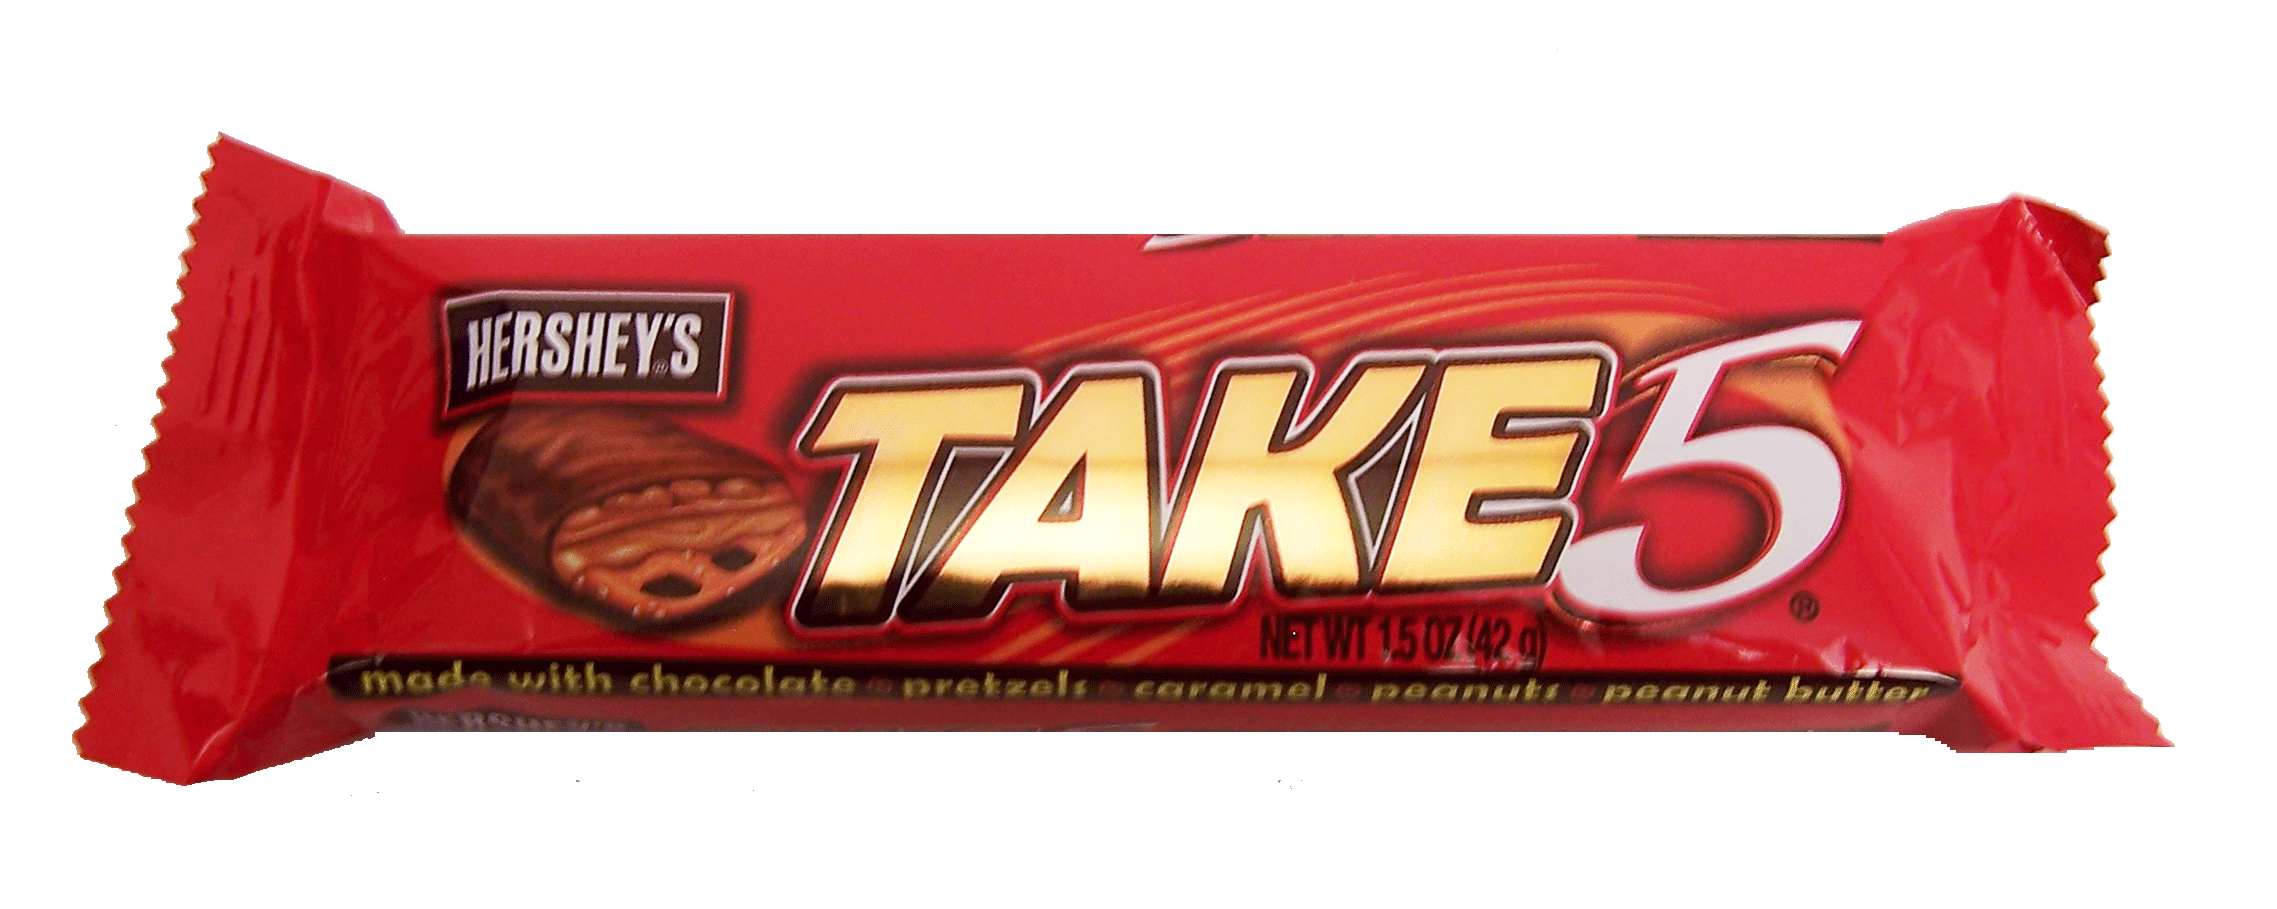 Hershey's Take 5 made with chocolate, pretzels, caramel, peanuts, and peanut butter Full-Size Picture